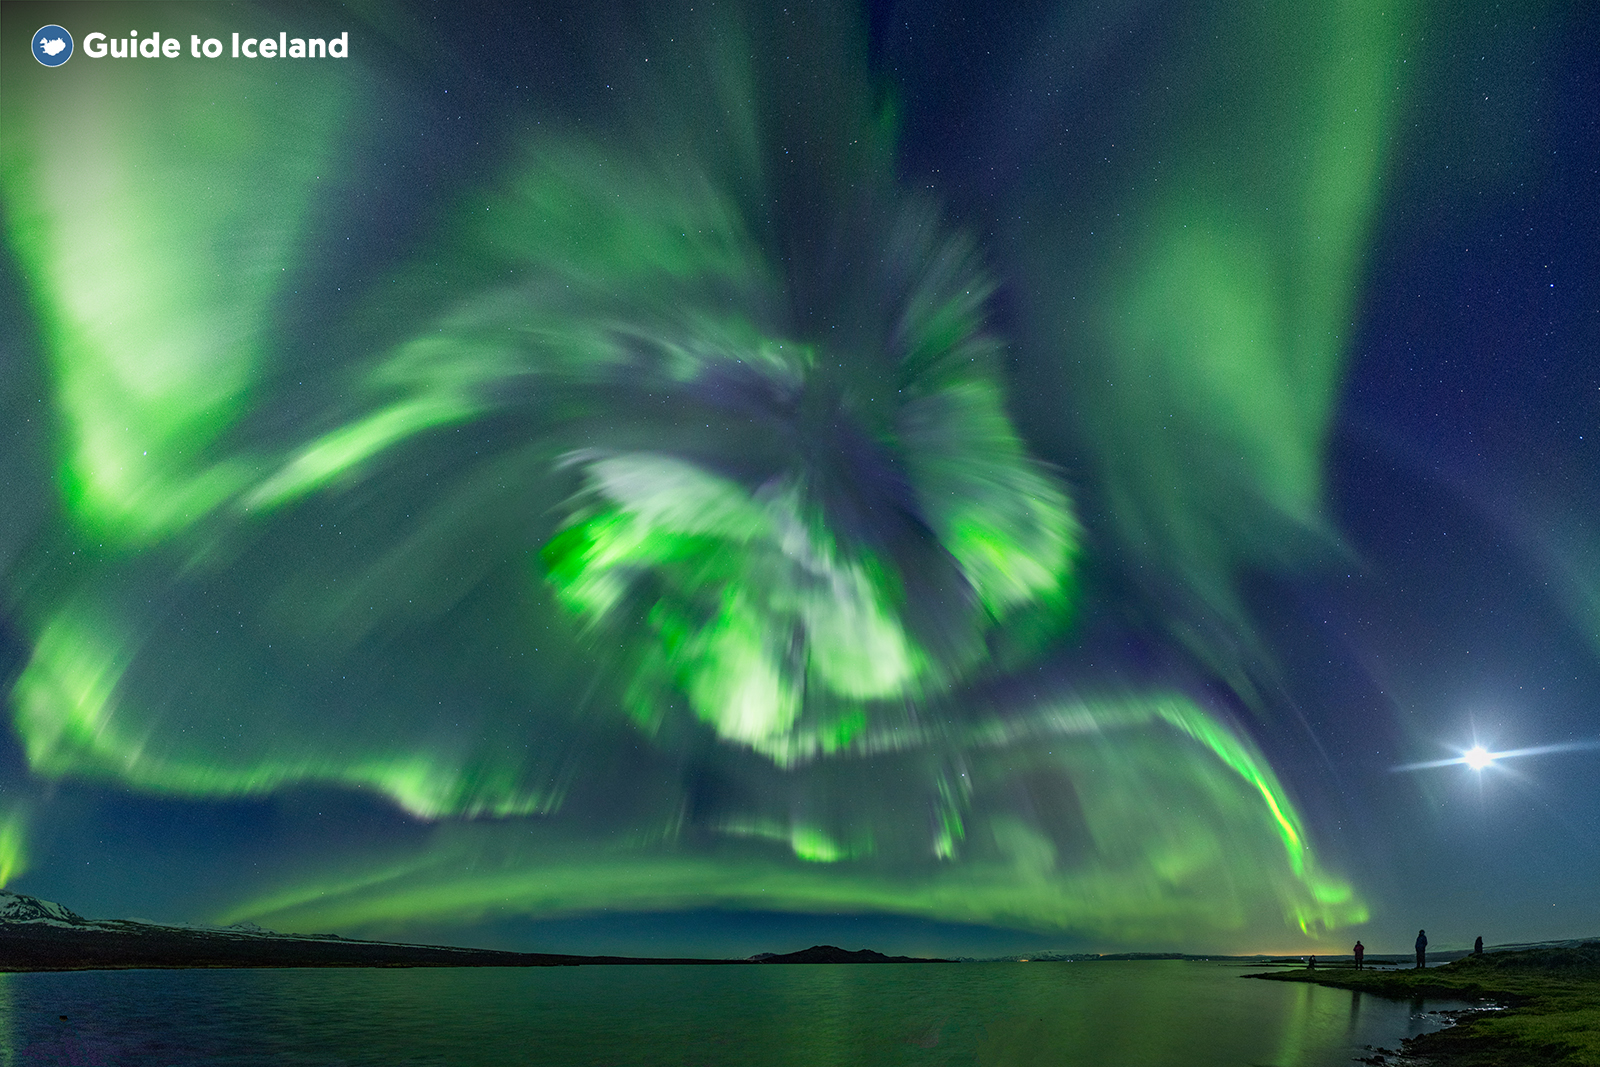 A magical display of the auroras dances above an Icelandic landscape.